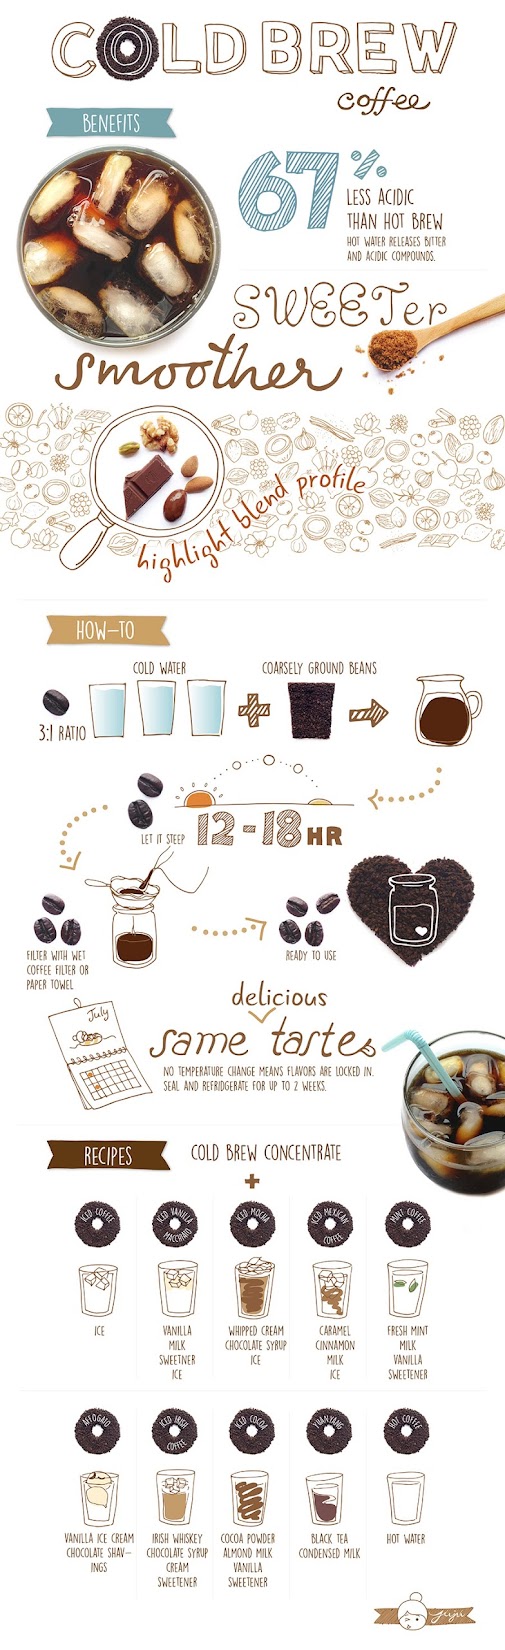 http://www.jujusprinkles.com/wp-content/uploads/2015/07/Cold-Brew-Coffee-Infographics-How-to-Benefits-Recipes-Juju-01.jpg